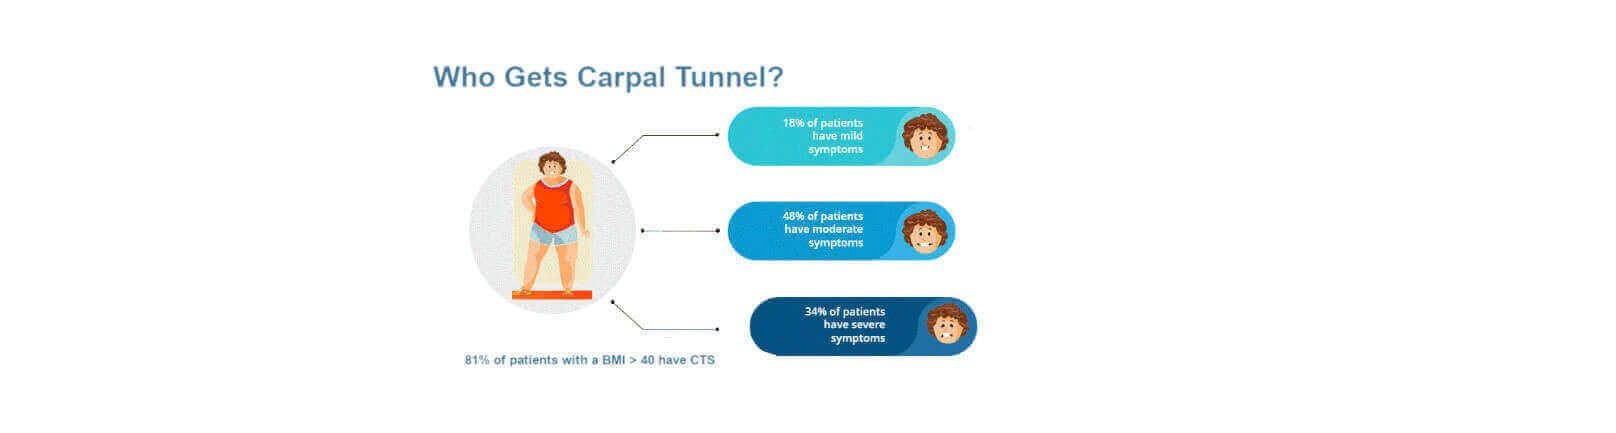 carpal tunnel infographic